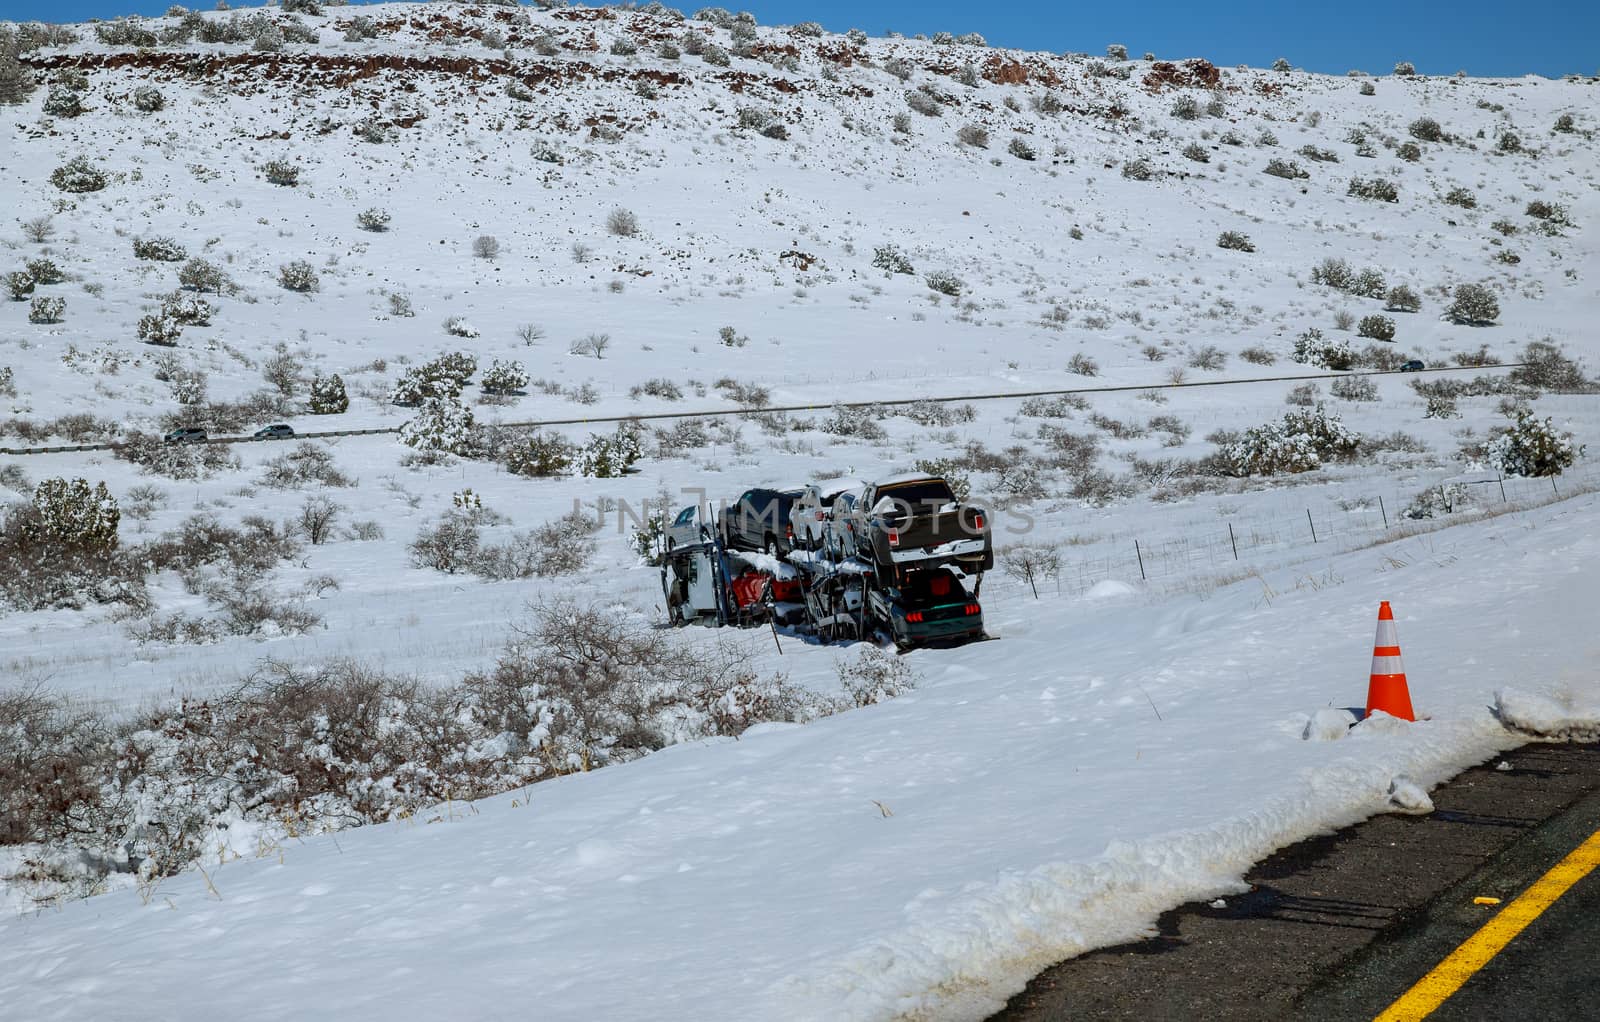 Drift of the car carrier trailer truck on the winter road because of snowy mountain road in winter